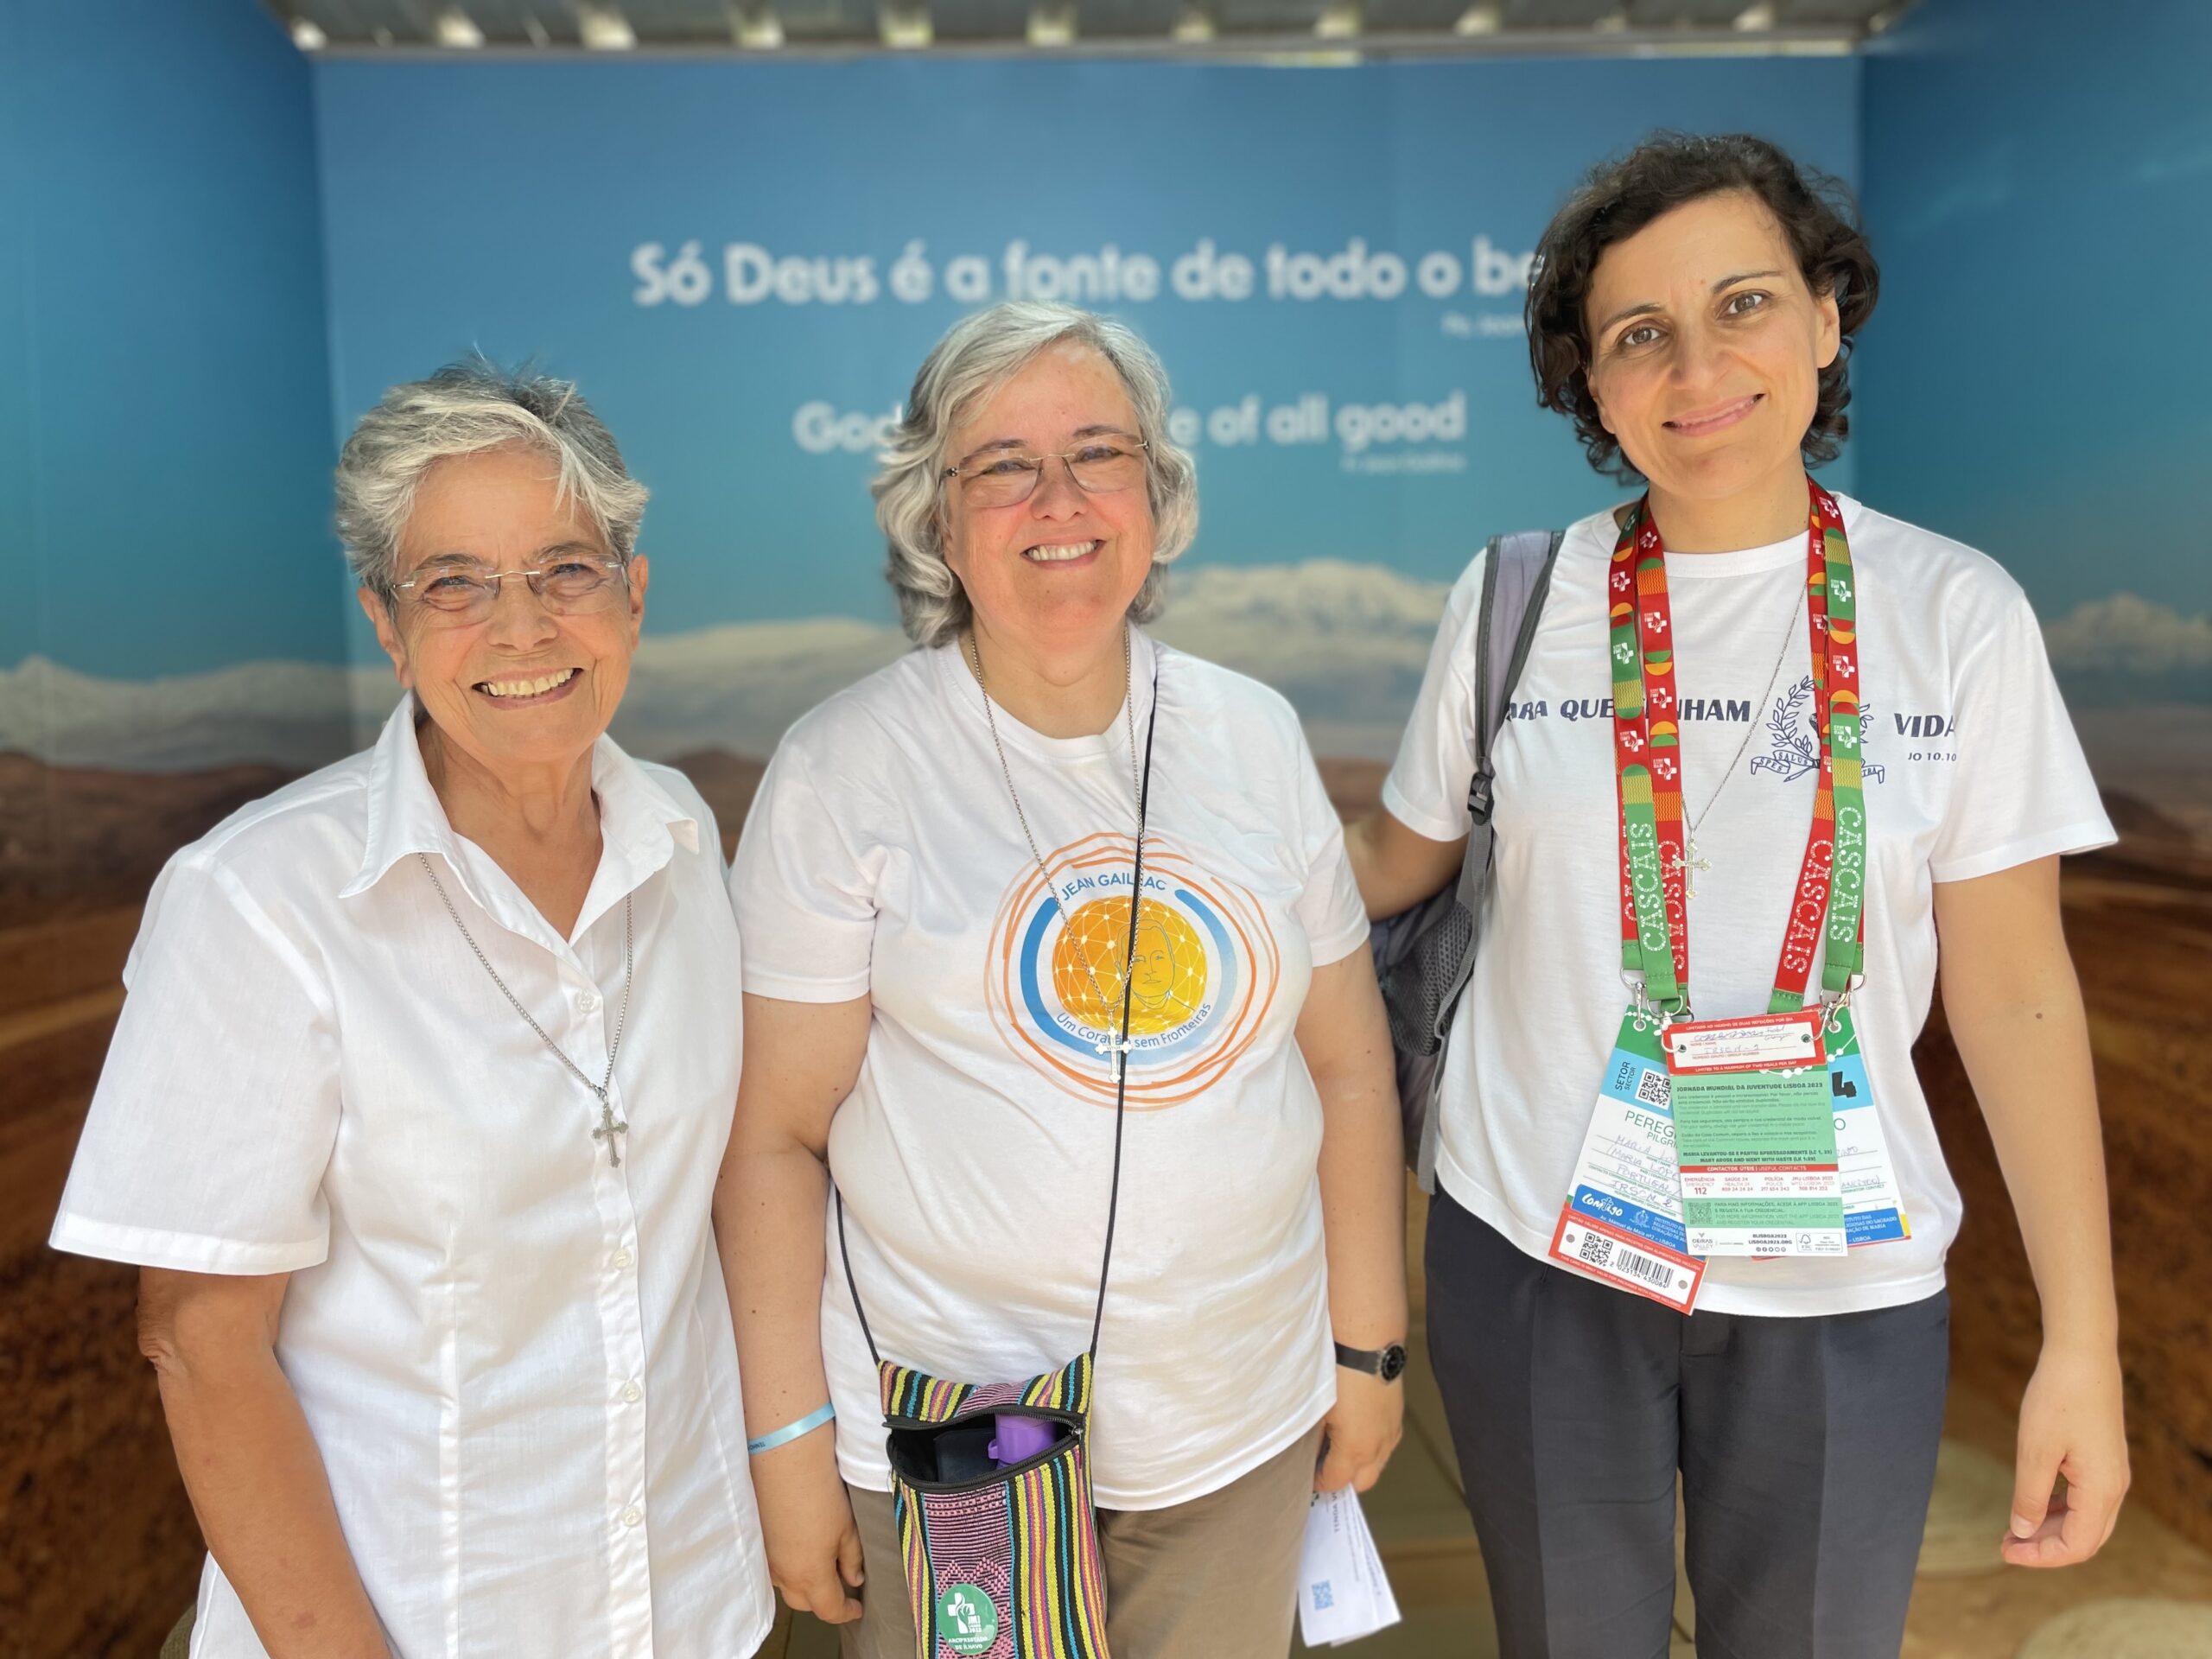 Sr. Maria Lopes, Sr. Isabel Grangeon and Sr. Ana Luísa Pinto at the WYD Vocational Fair. Credits: RSHM.